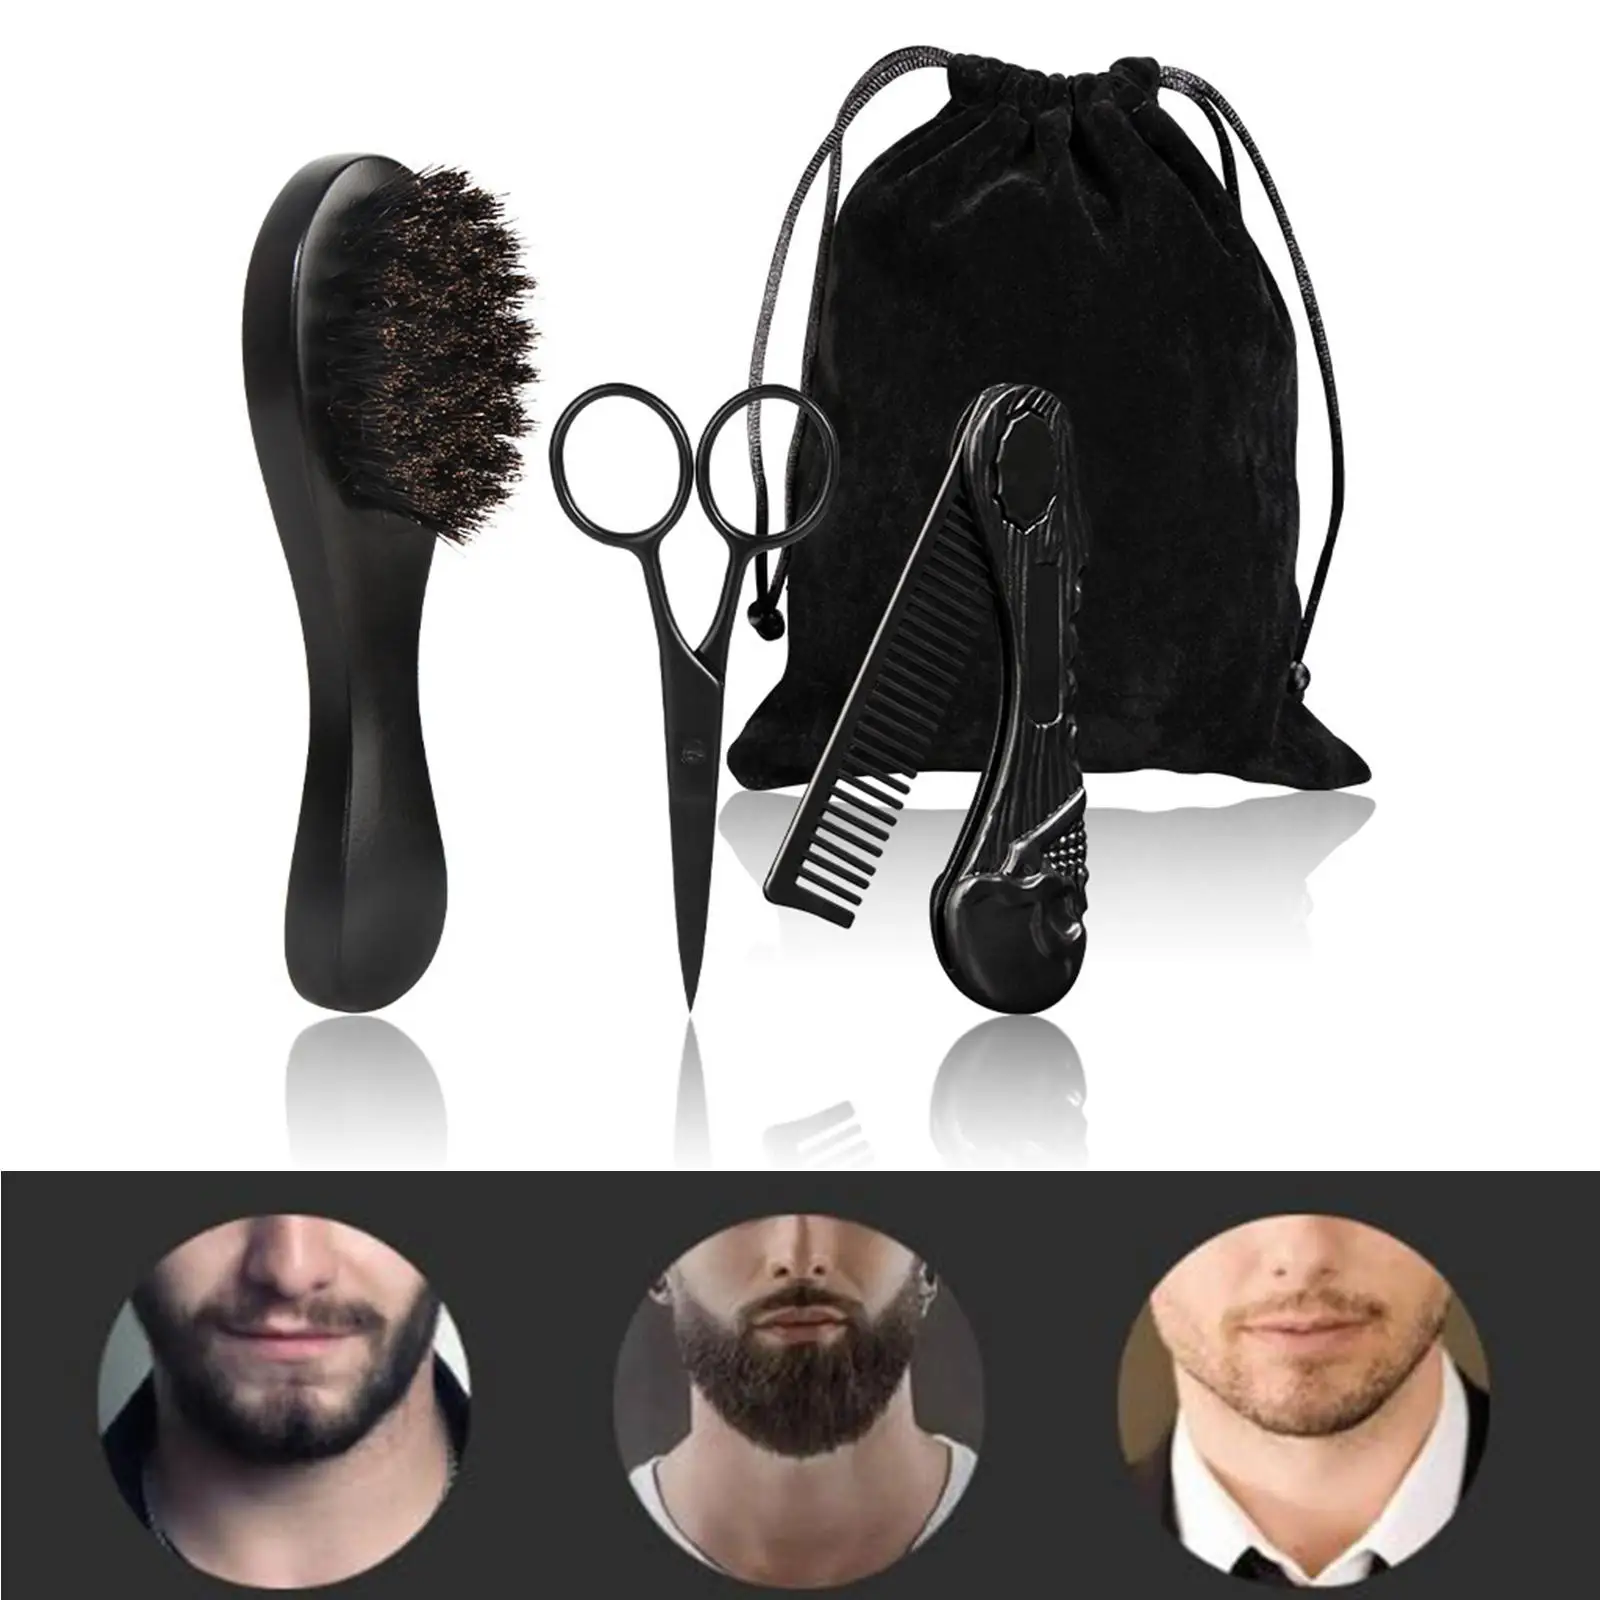 3 Pieces Professional Beard Care Kit for Men Gift Pocket Comb Brush with Dustproof Bag for Home Men`s Cleaning Grooming Tool